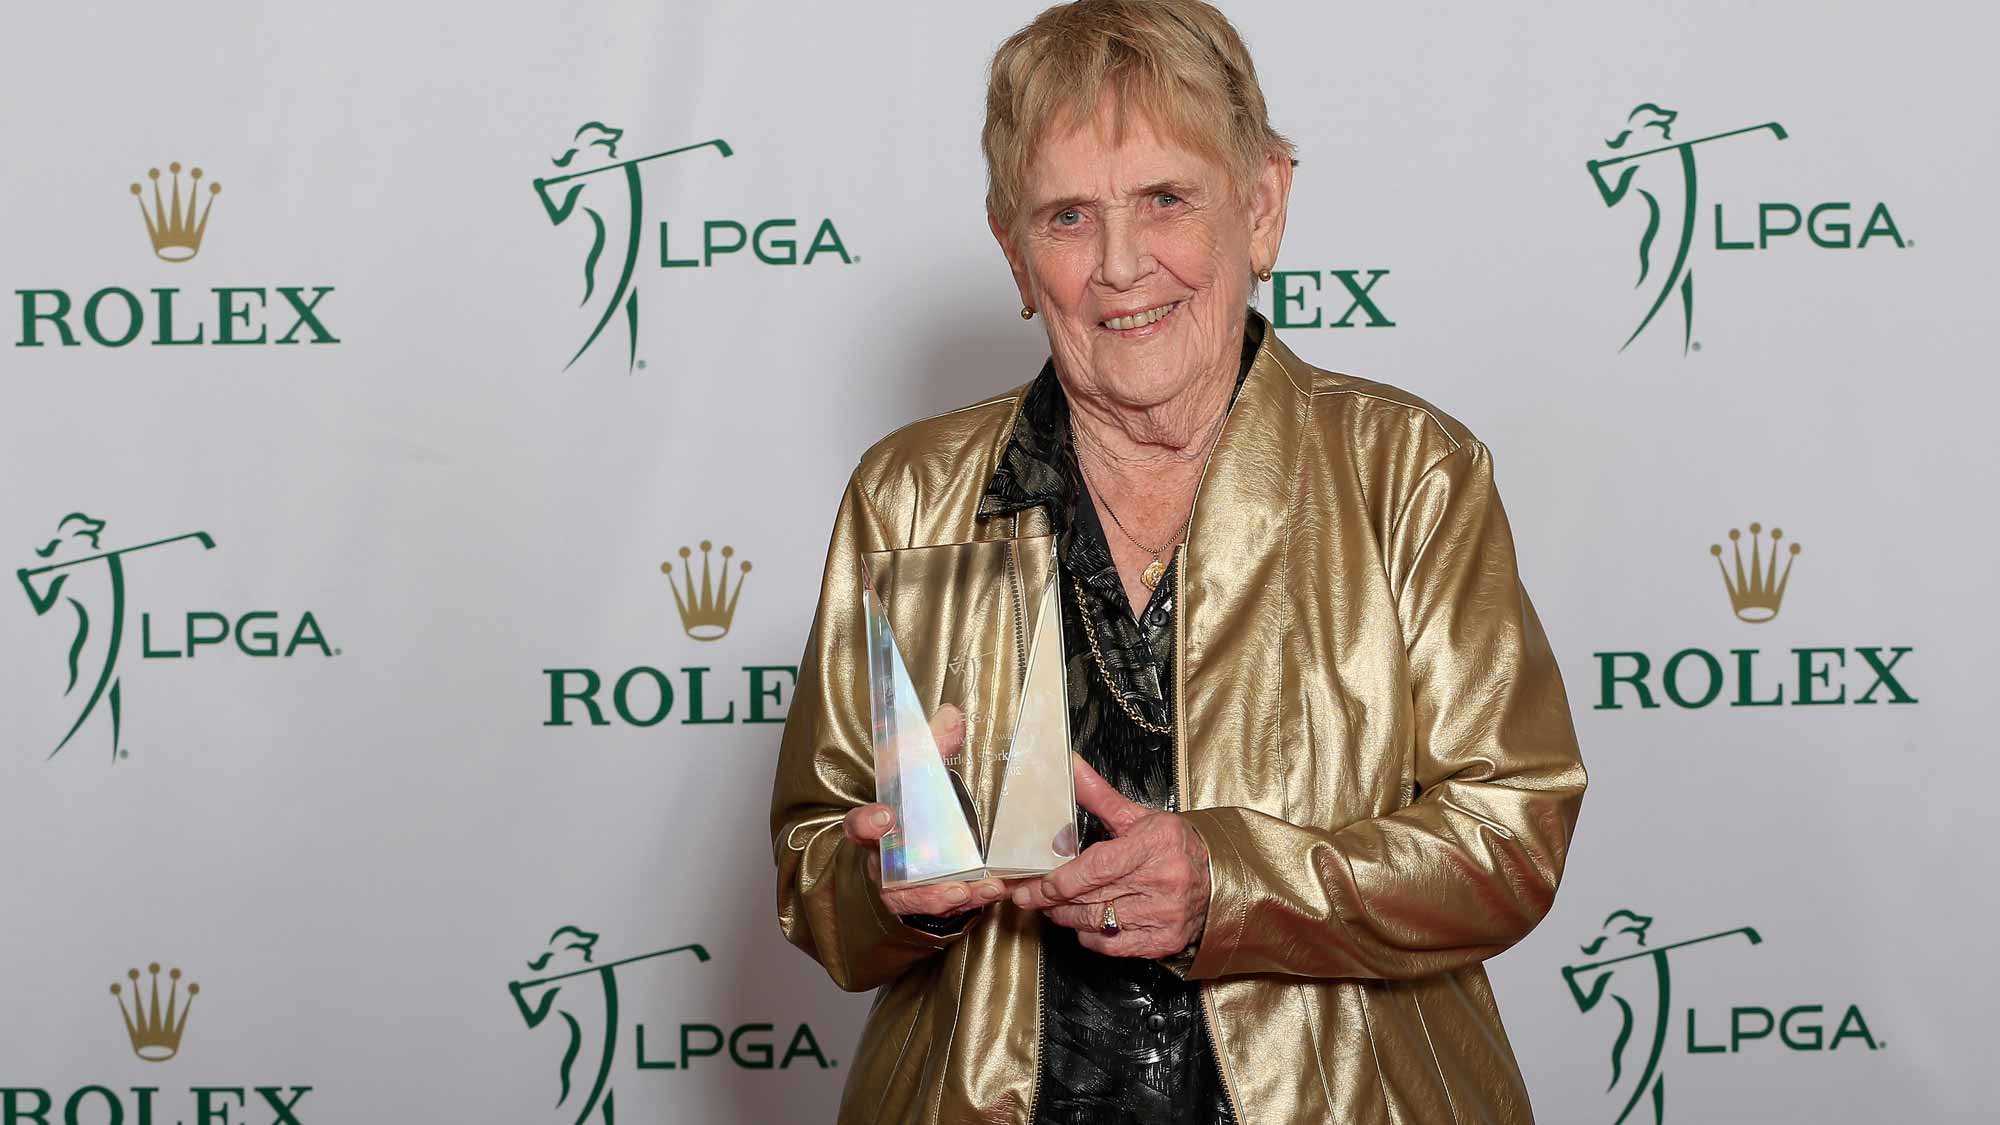 Shirley Spork, one of the LPGA founders, poses with the Patty Berg Award at the LPGA Rolex Players Awards at the Ritz-Carlton, Naples